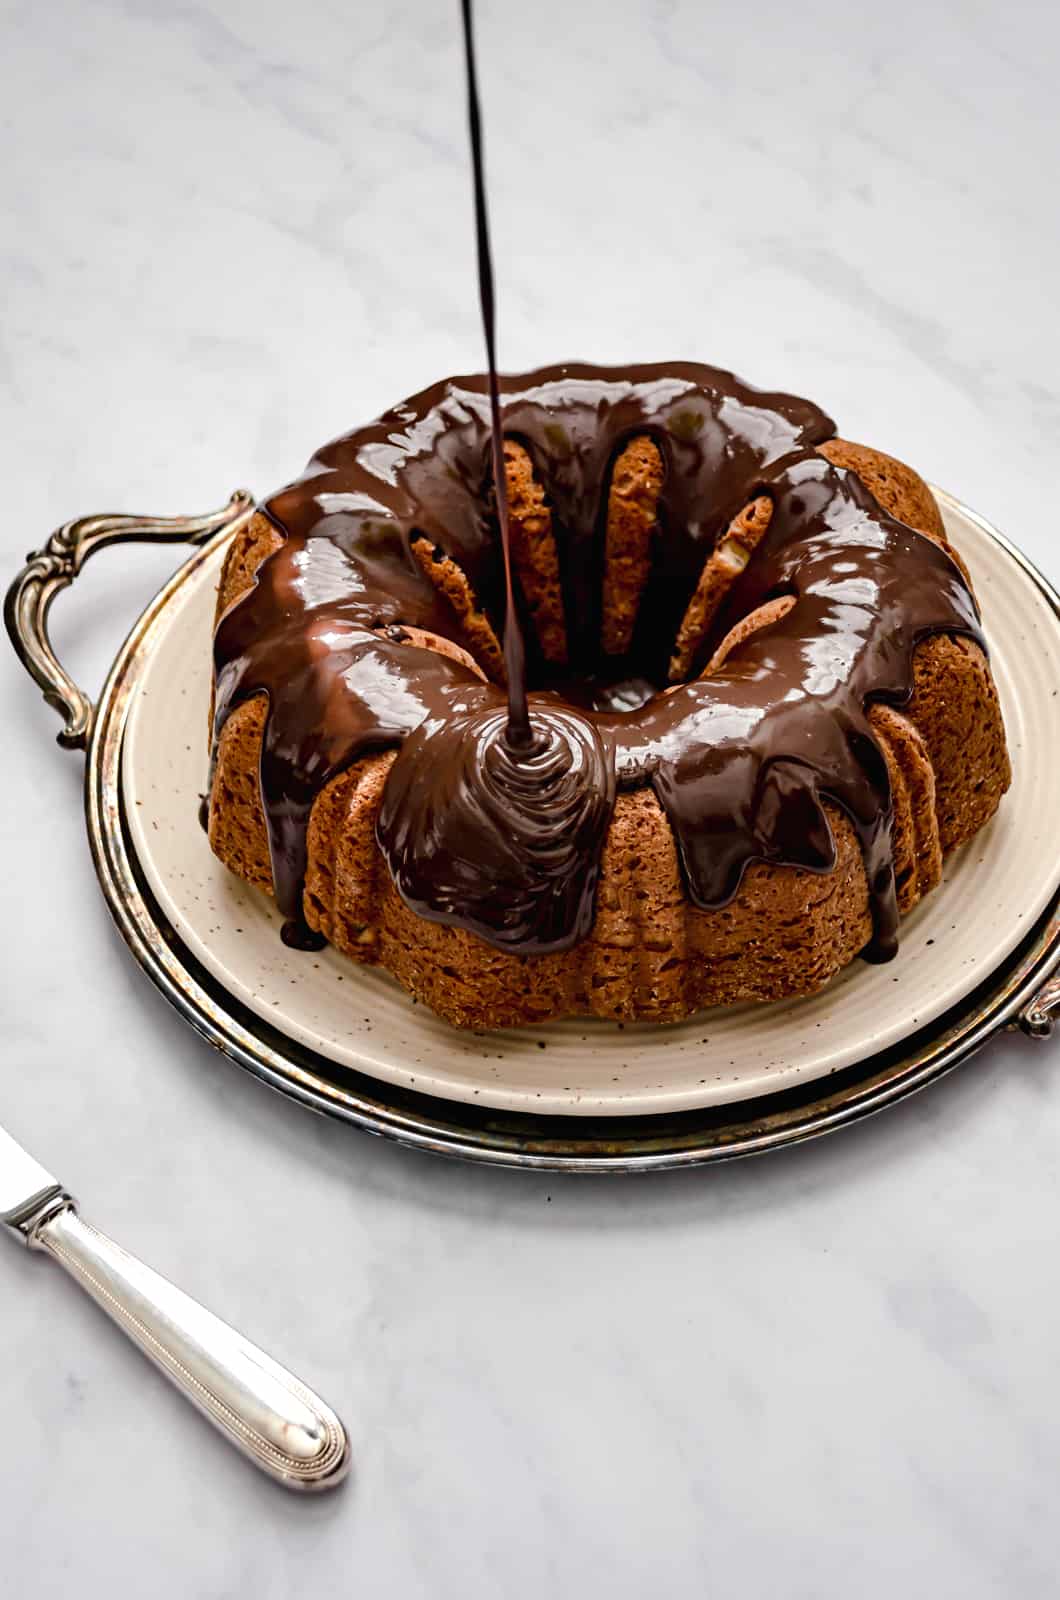 roasted banana bundt cake with chocolate glaze being drizzled on top.